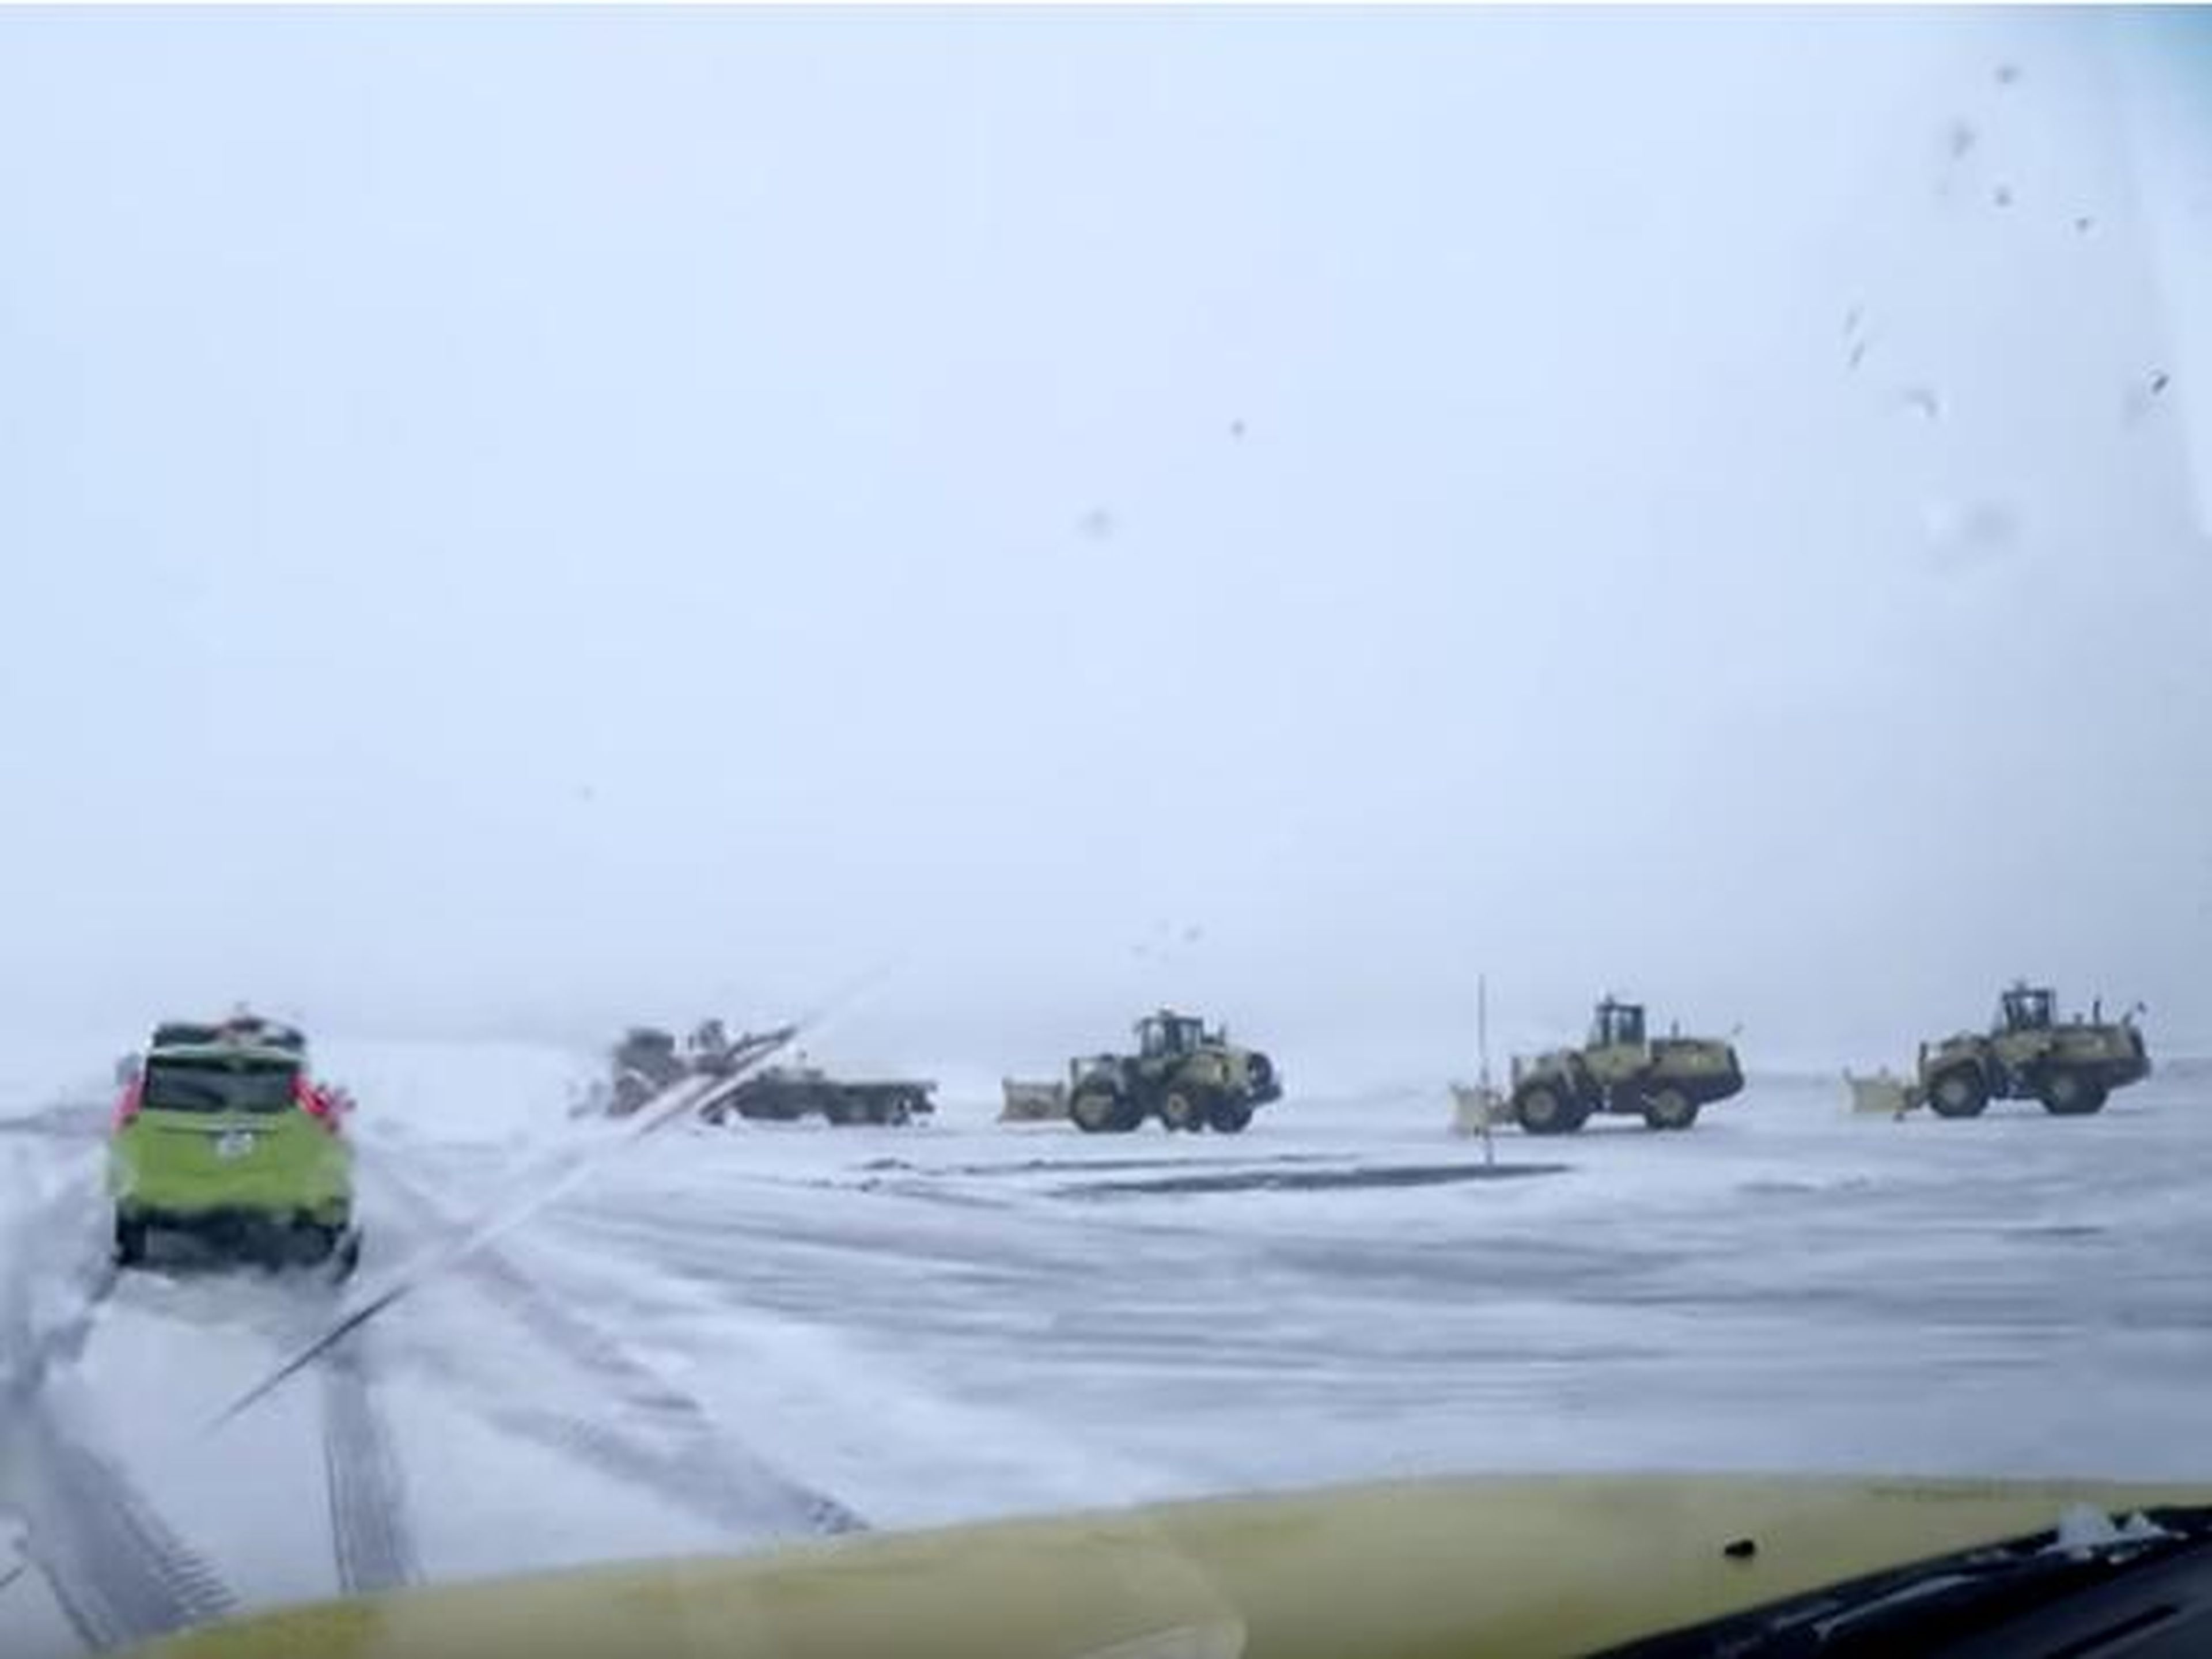 The team is known as White Impulse. A 38-vehicle formation of snowplows, snowblowers, snow sweepers, anti-freeze sprayers, and other smaller vehicles are sent out at the same time, and the team clears the airport's runway, taxiway